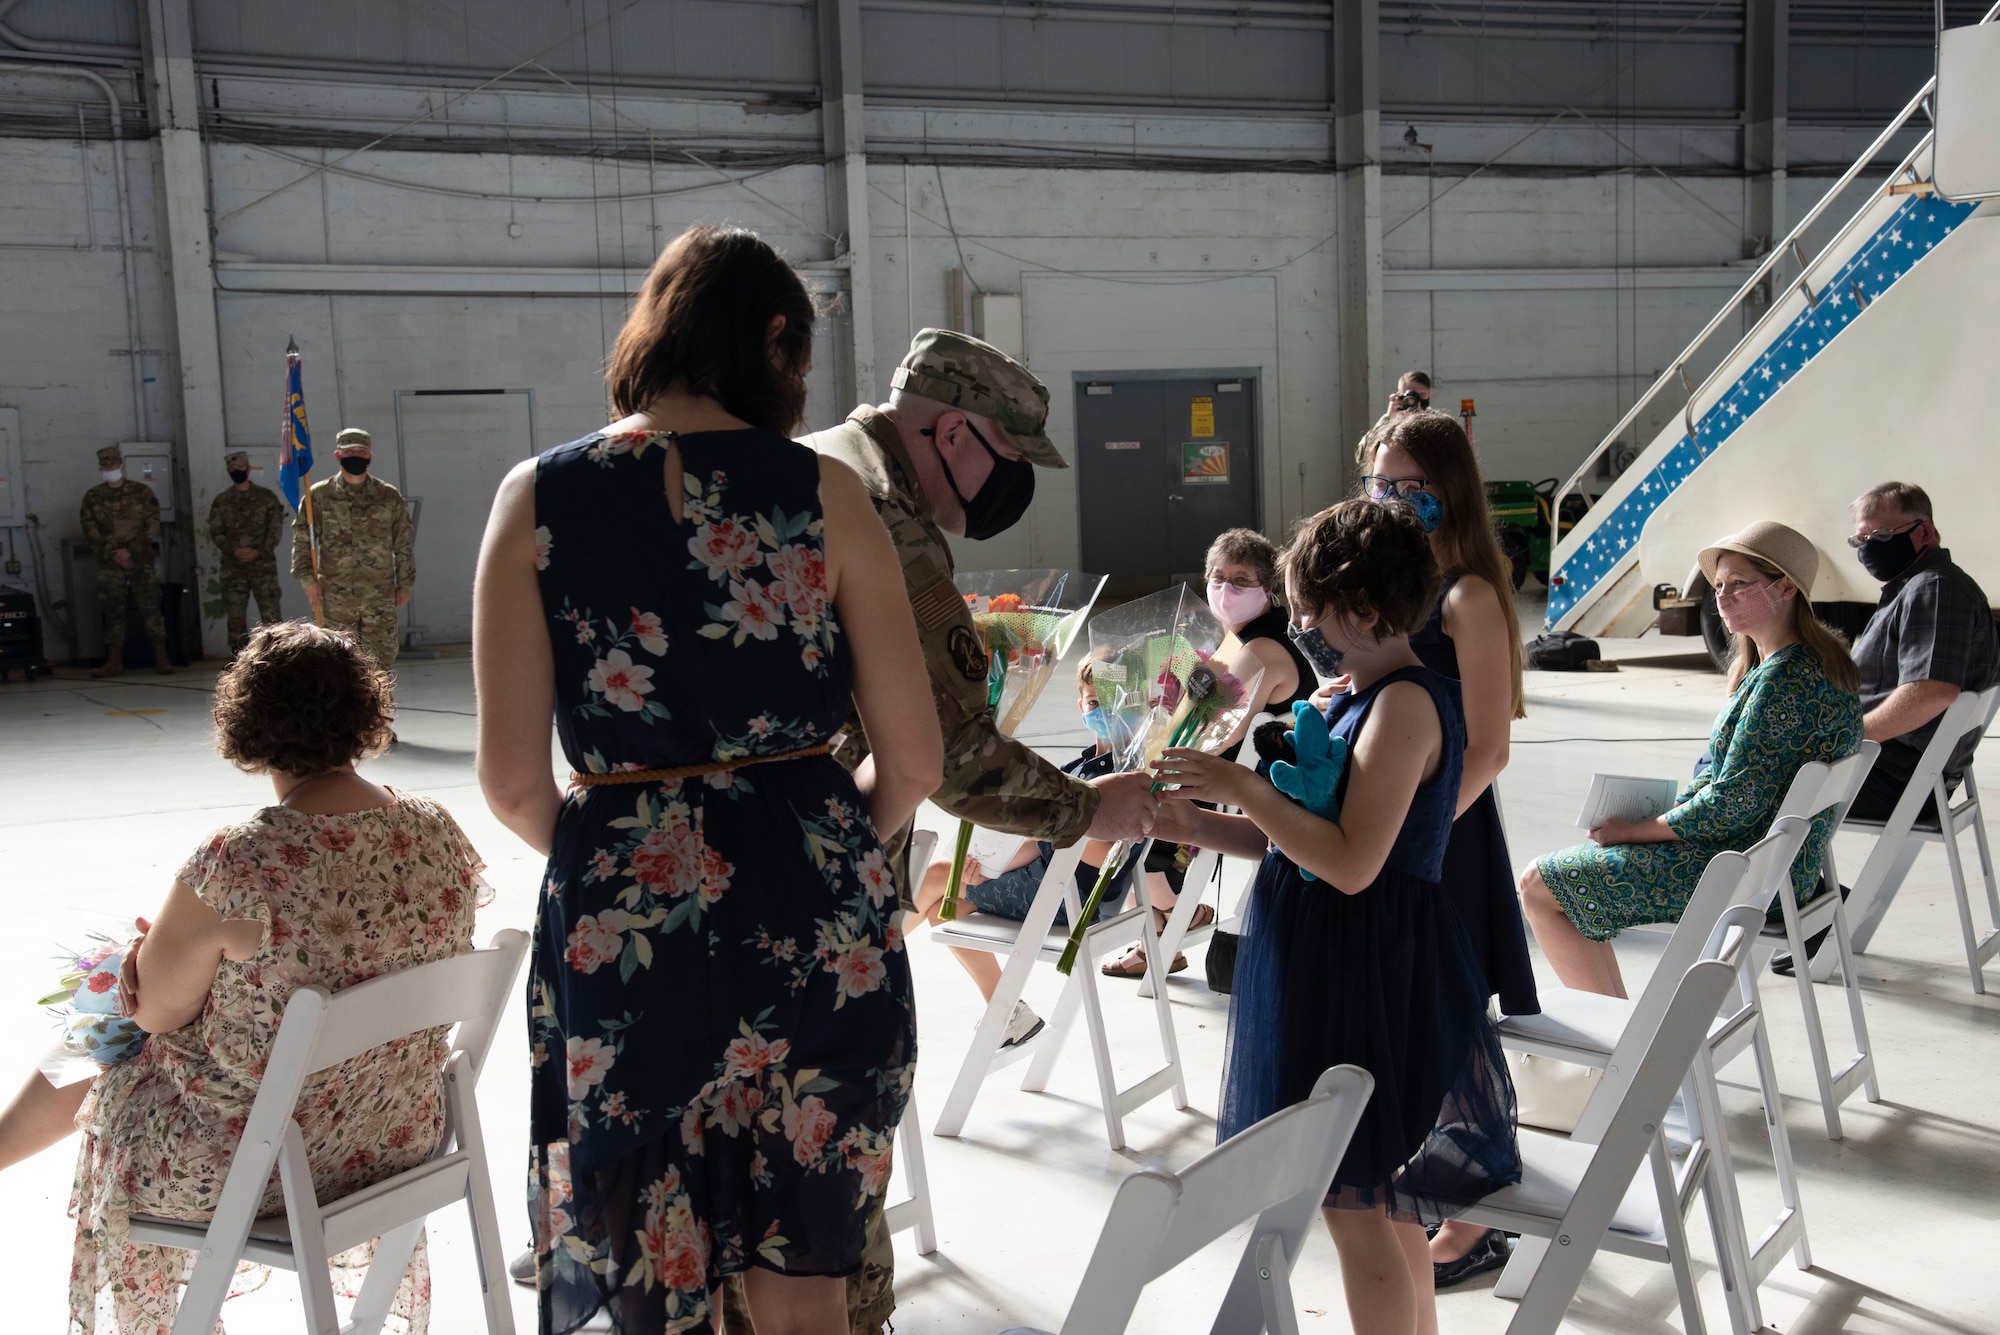 U.S. Air Force Maj. Aaron W. Darty, in-coming 6th Maintenance Squadron commander, presents flowers to his wife Gina and daughters Temple and Grace, during a change of command ceremony, May 10, 2021 at MacDill Air Force Base, Florida.